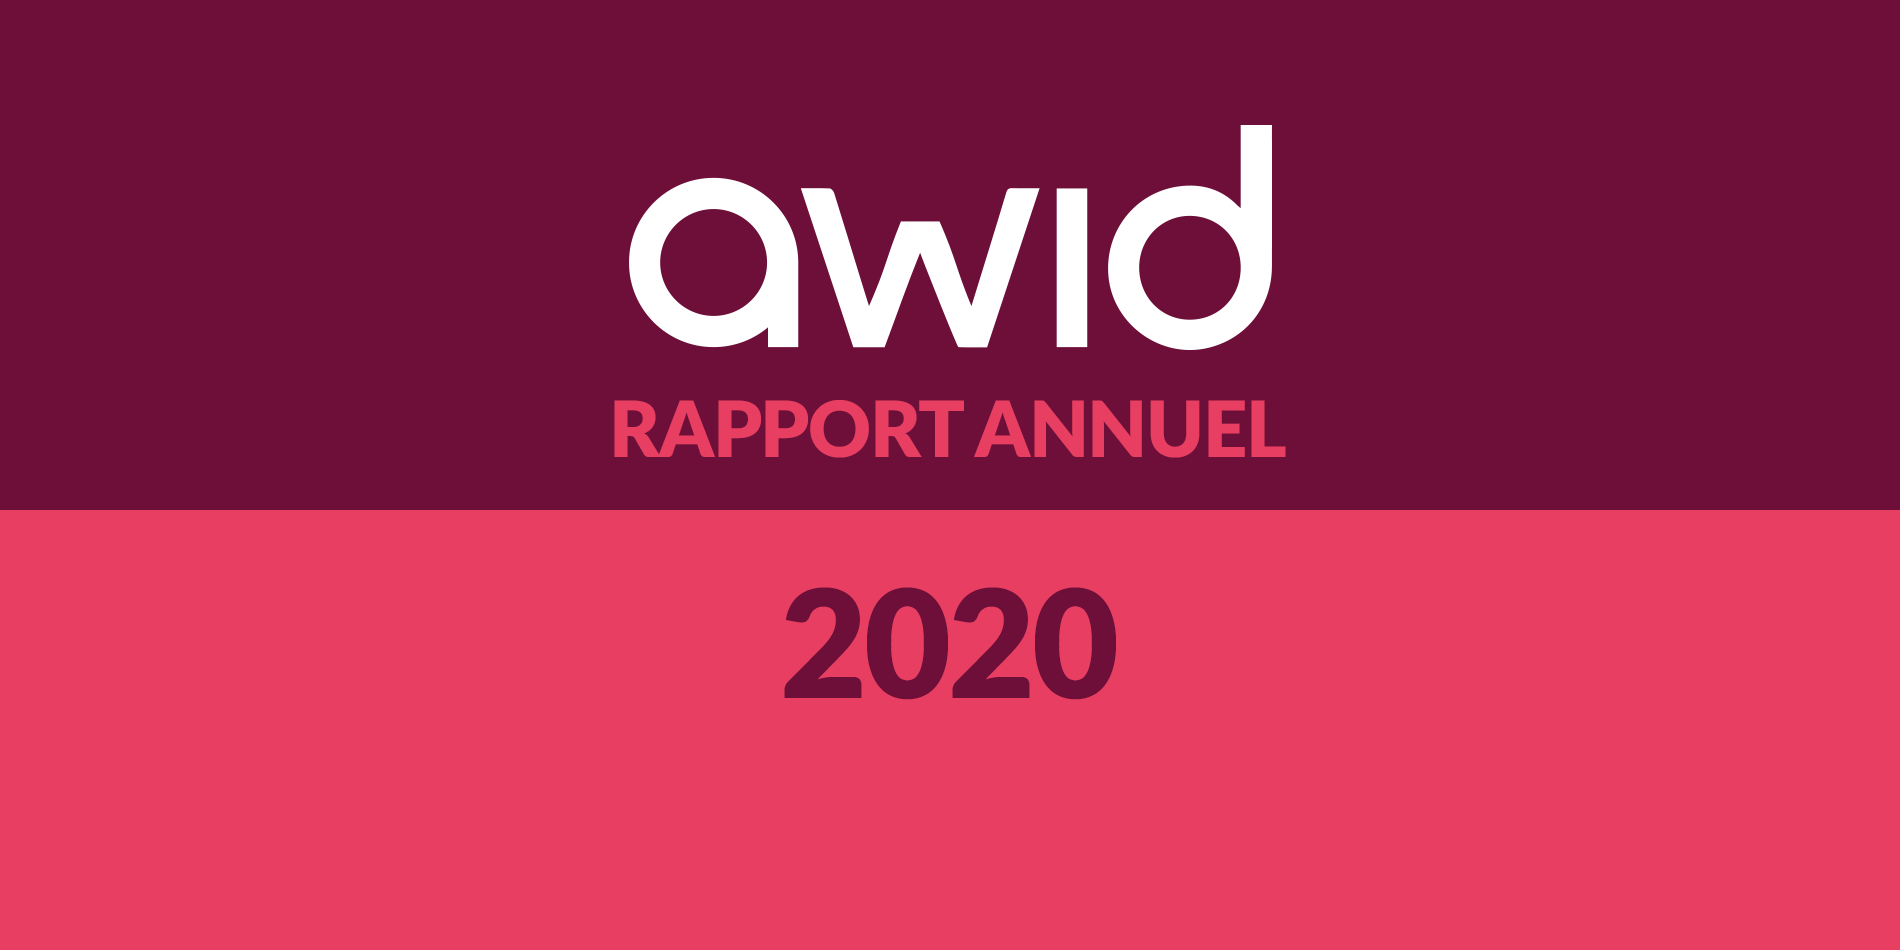 Website-Banners_annual-report-2020-fr_0.png